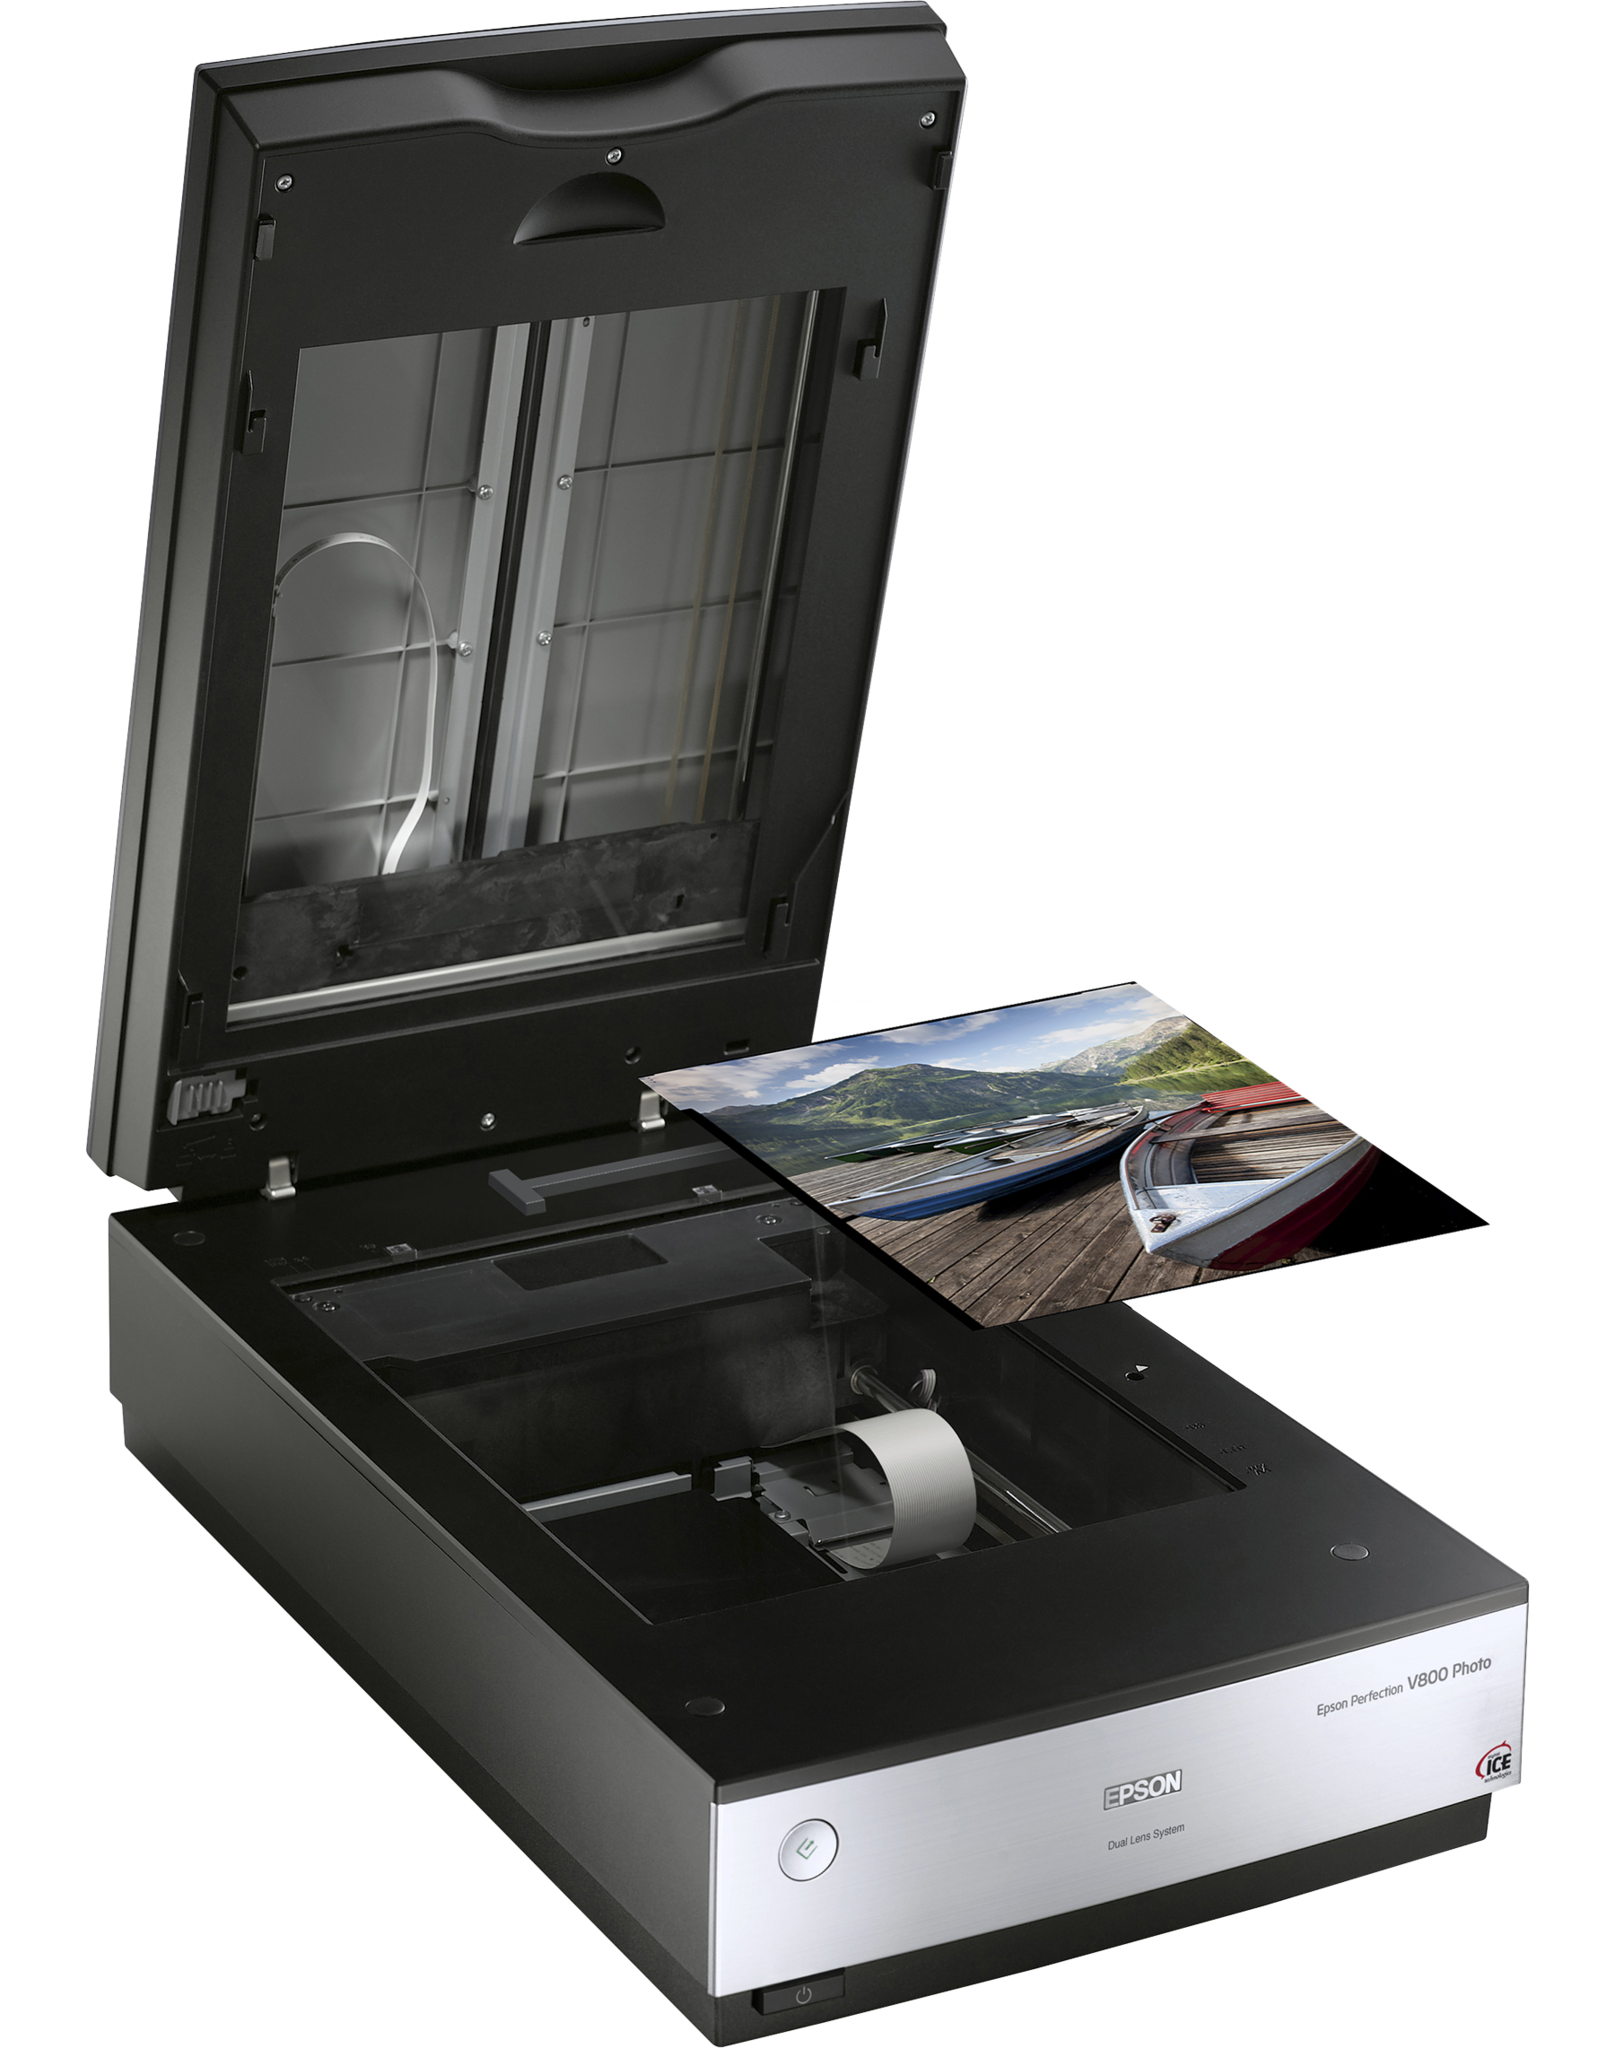 Epson Perfection V800 Photo Scanner, computers flatbed scanners, Epson - Pictureline  - 3